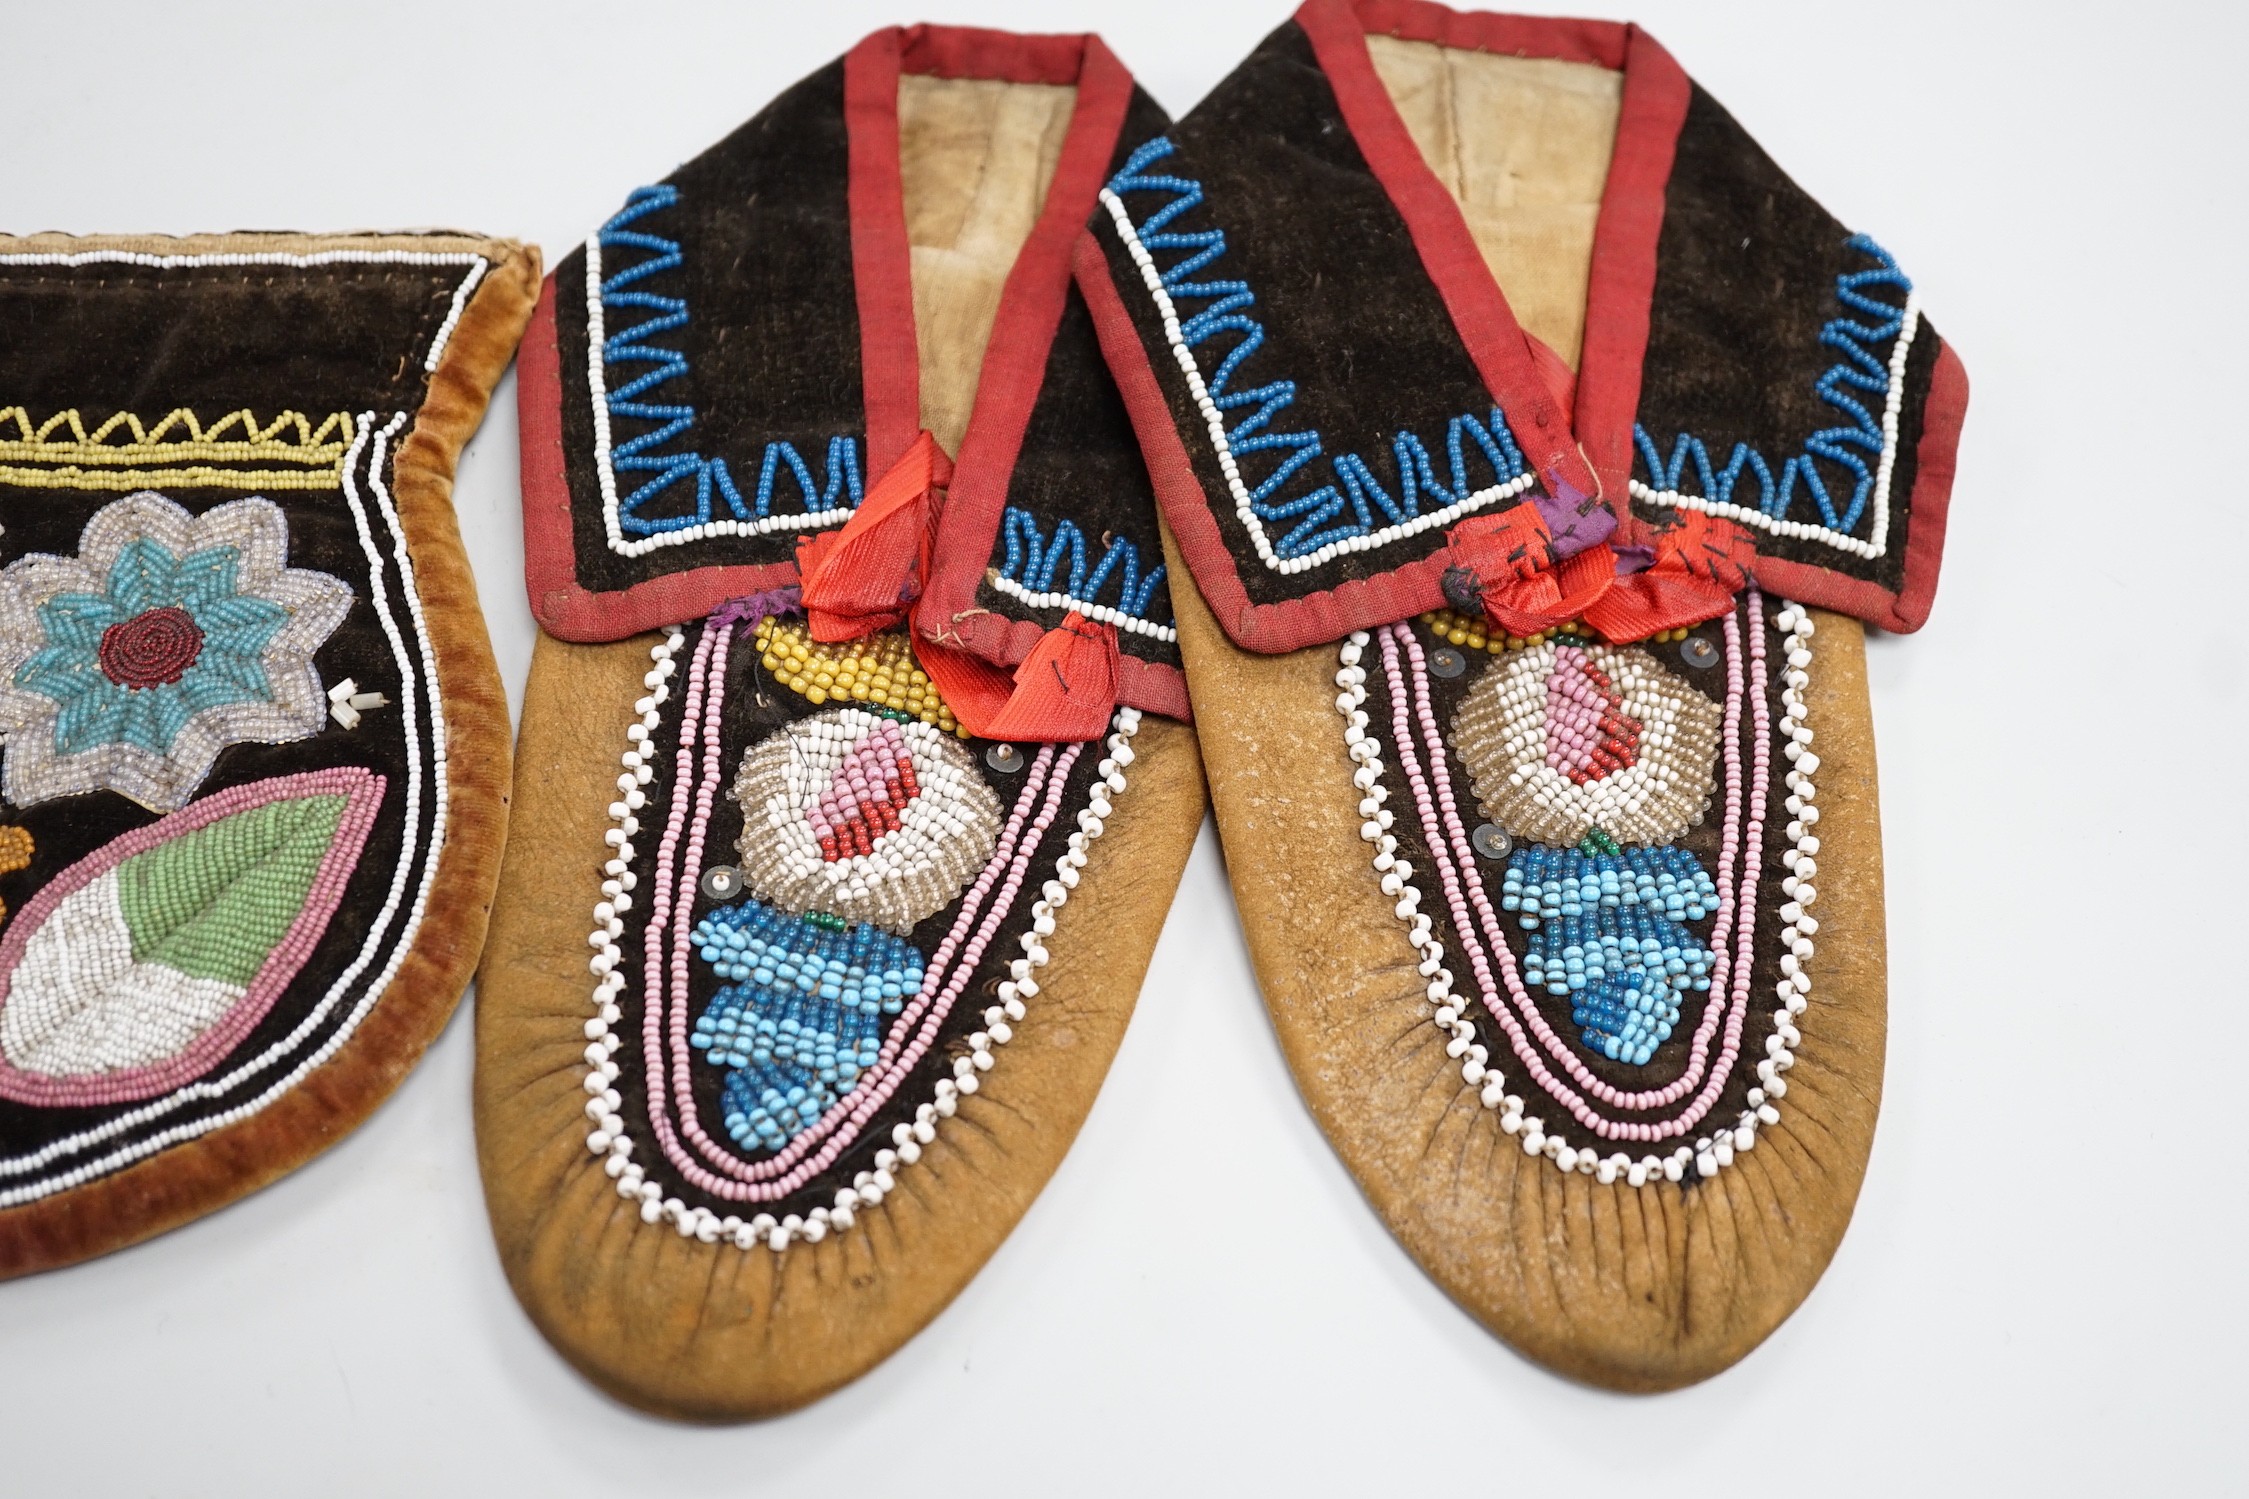 A pair of mid to late 19th century Mikmaq, North American Indian, moccasins, worked in floral - Image 4 of 5